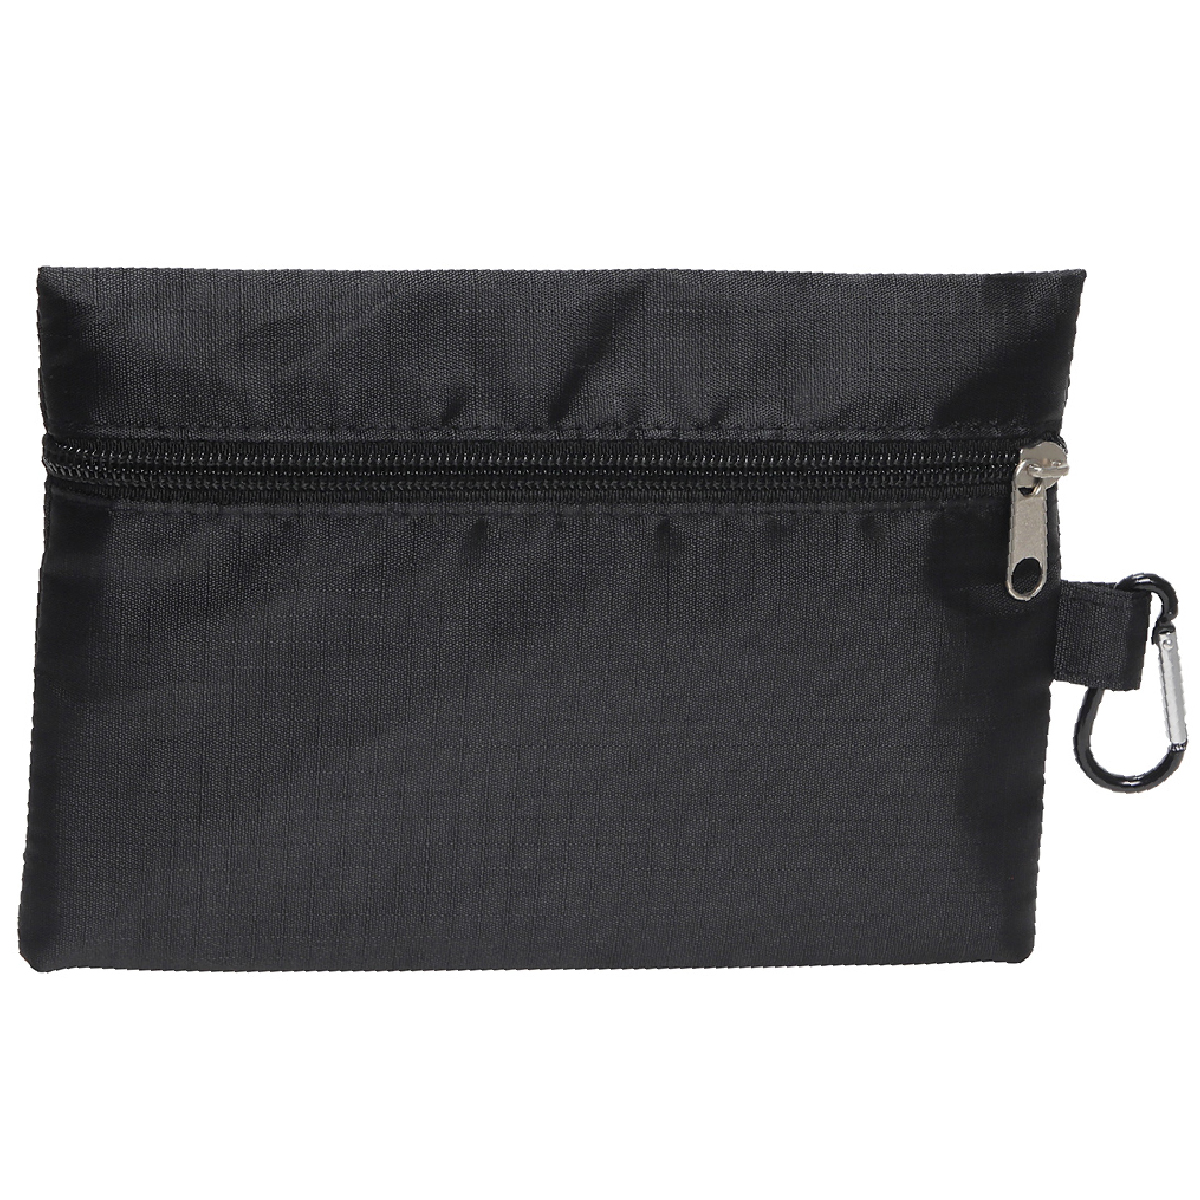 Black Zippered Ripstop Utility Bag with Carabiner